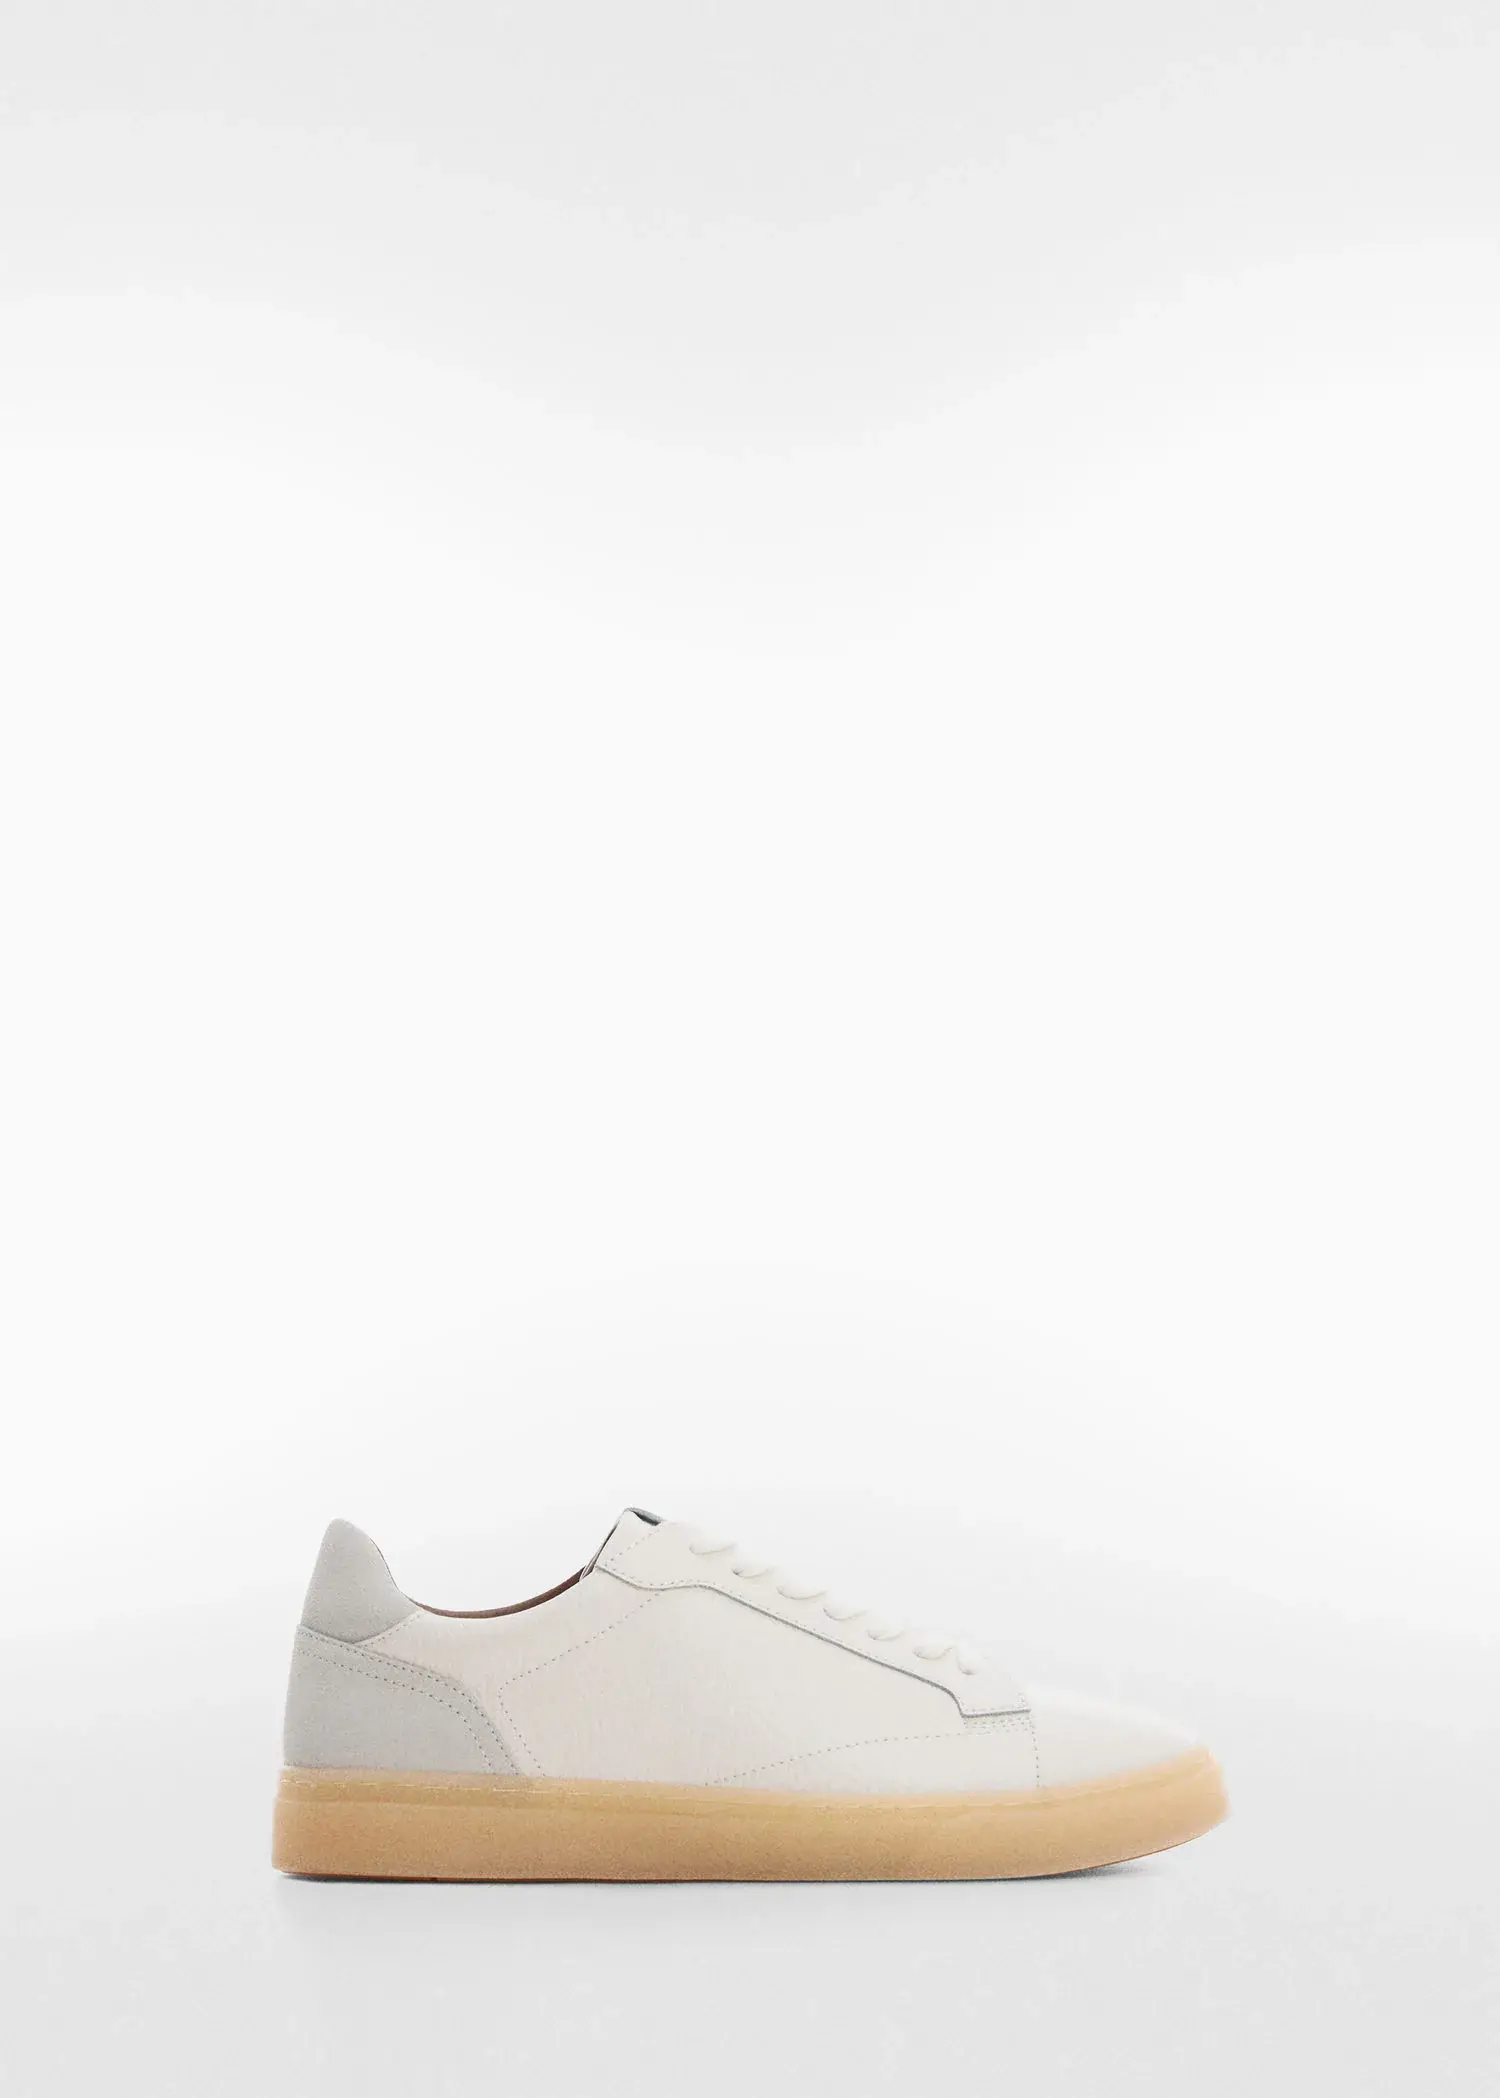 Mango Nappa leather sneakers. a pair of white sneakers with a wooden bottom. 